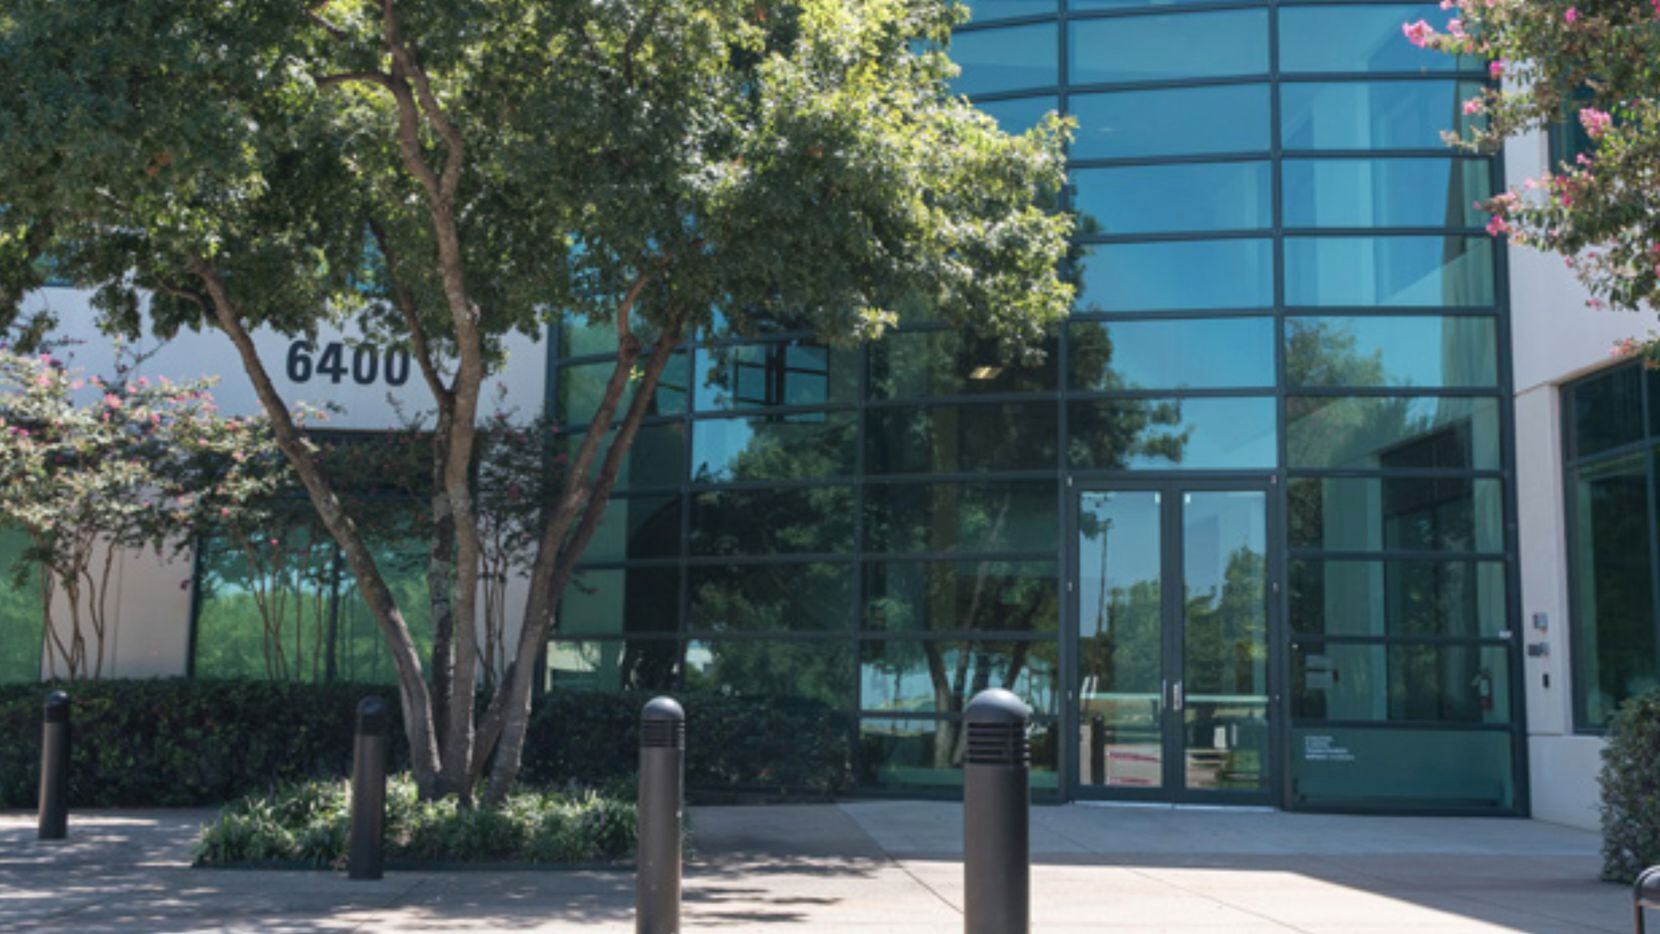 SML-RFID is more than doubling its office in Plano's International Business Park.